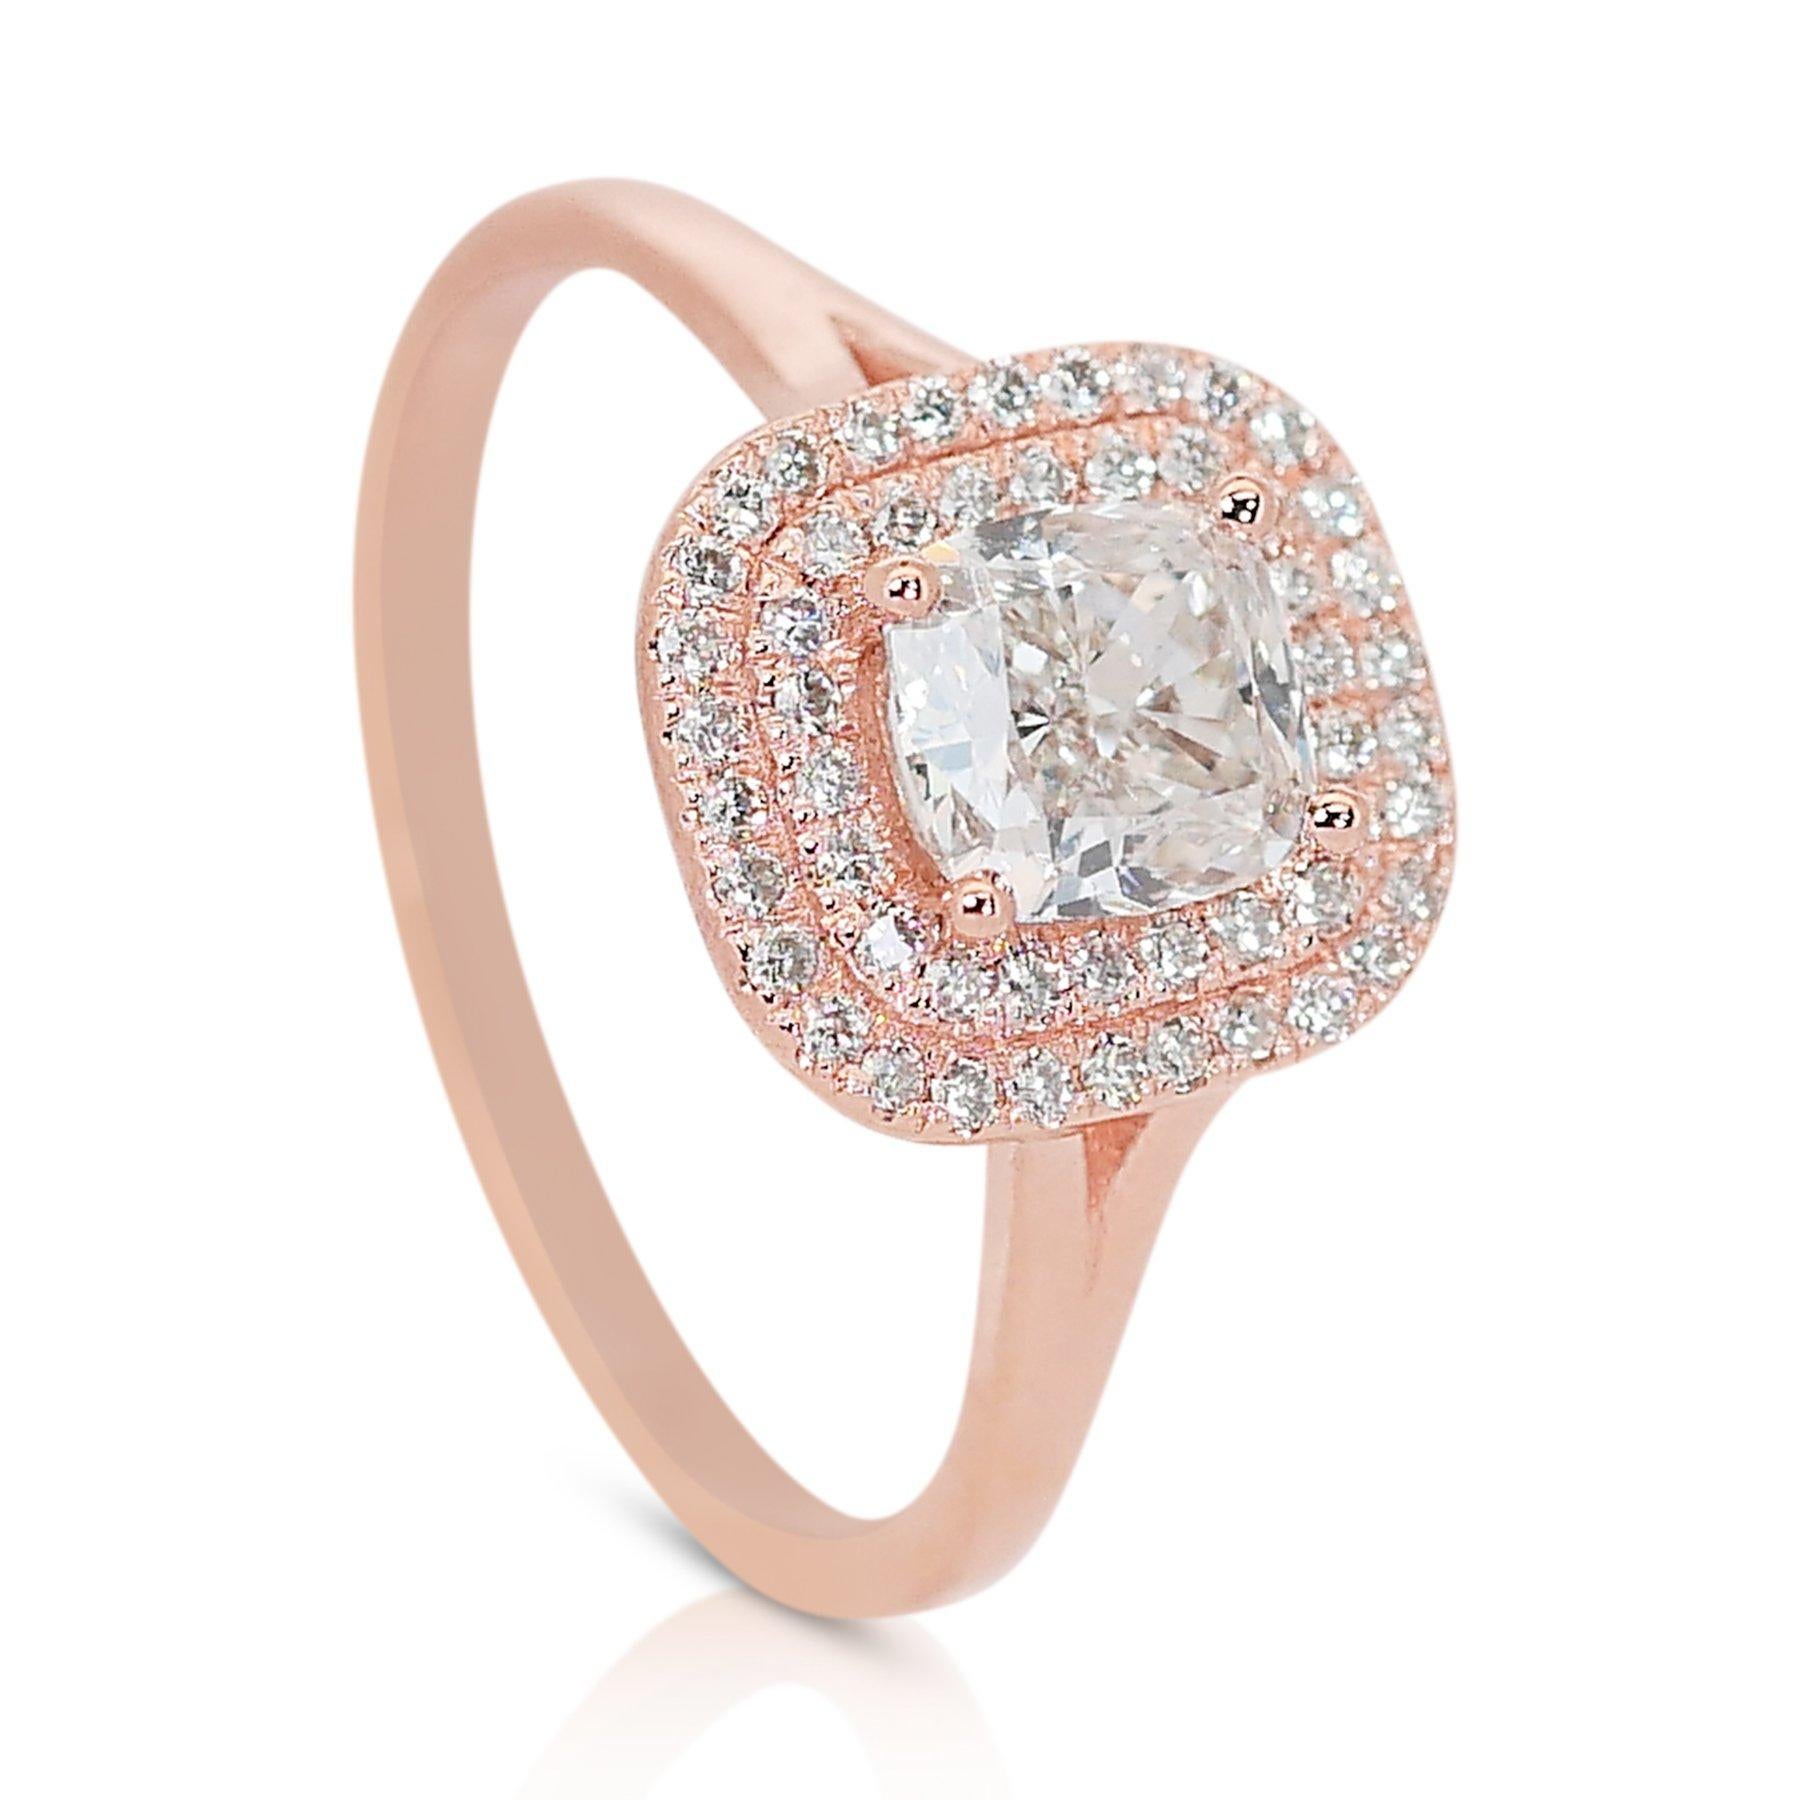 Elegant 1.41ct Diamonds Double Halo Ring in 18k Rose Gold - GIA Certified For Sale 1